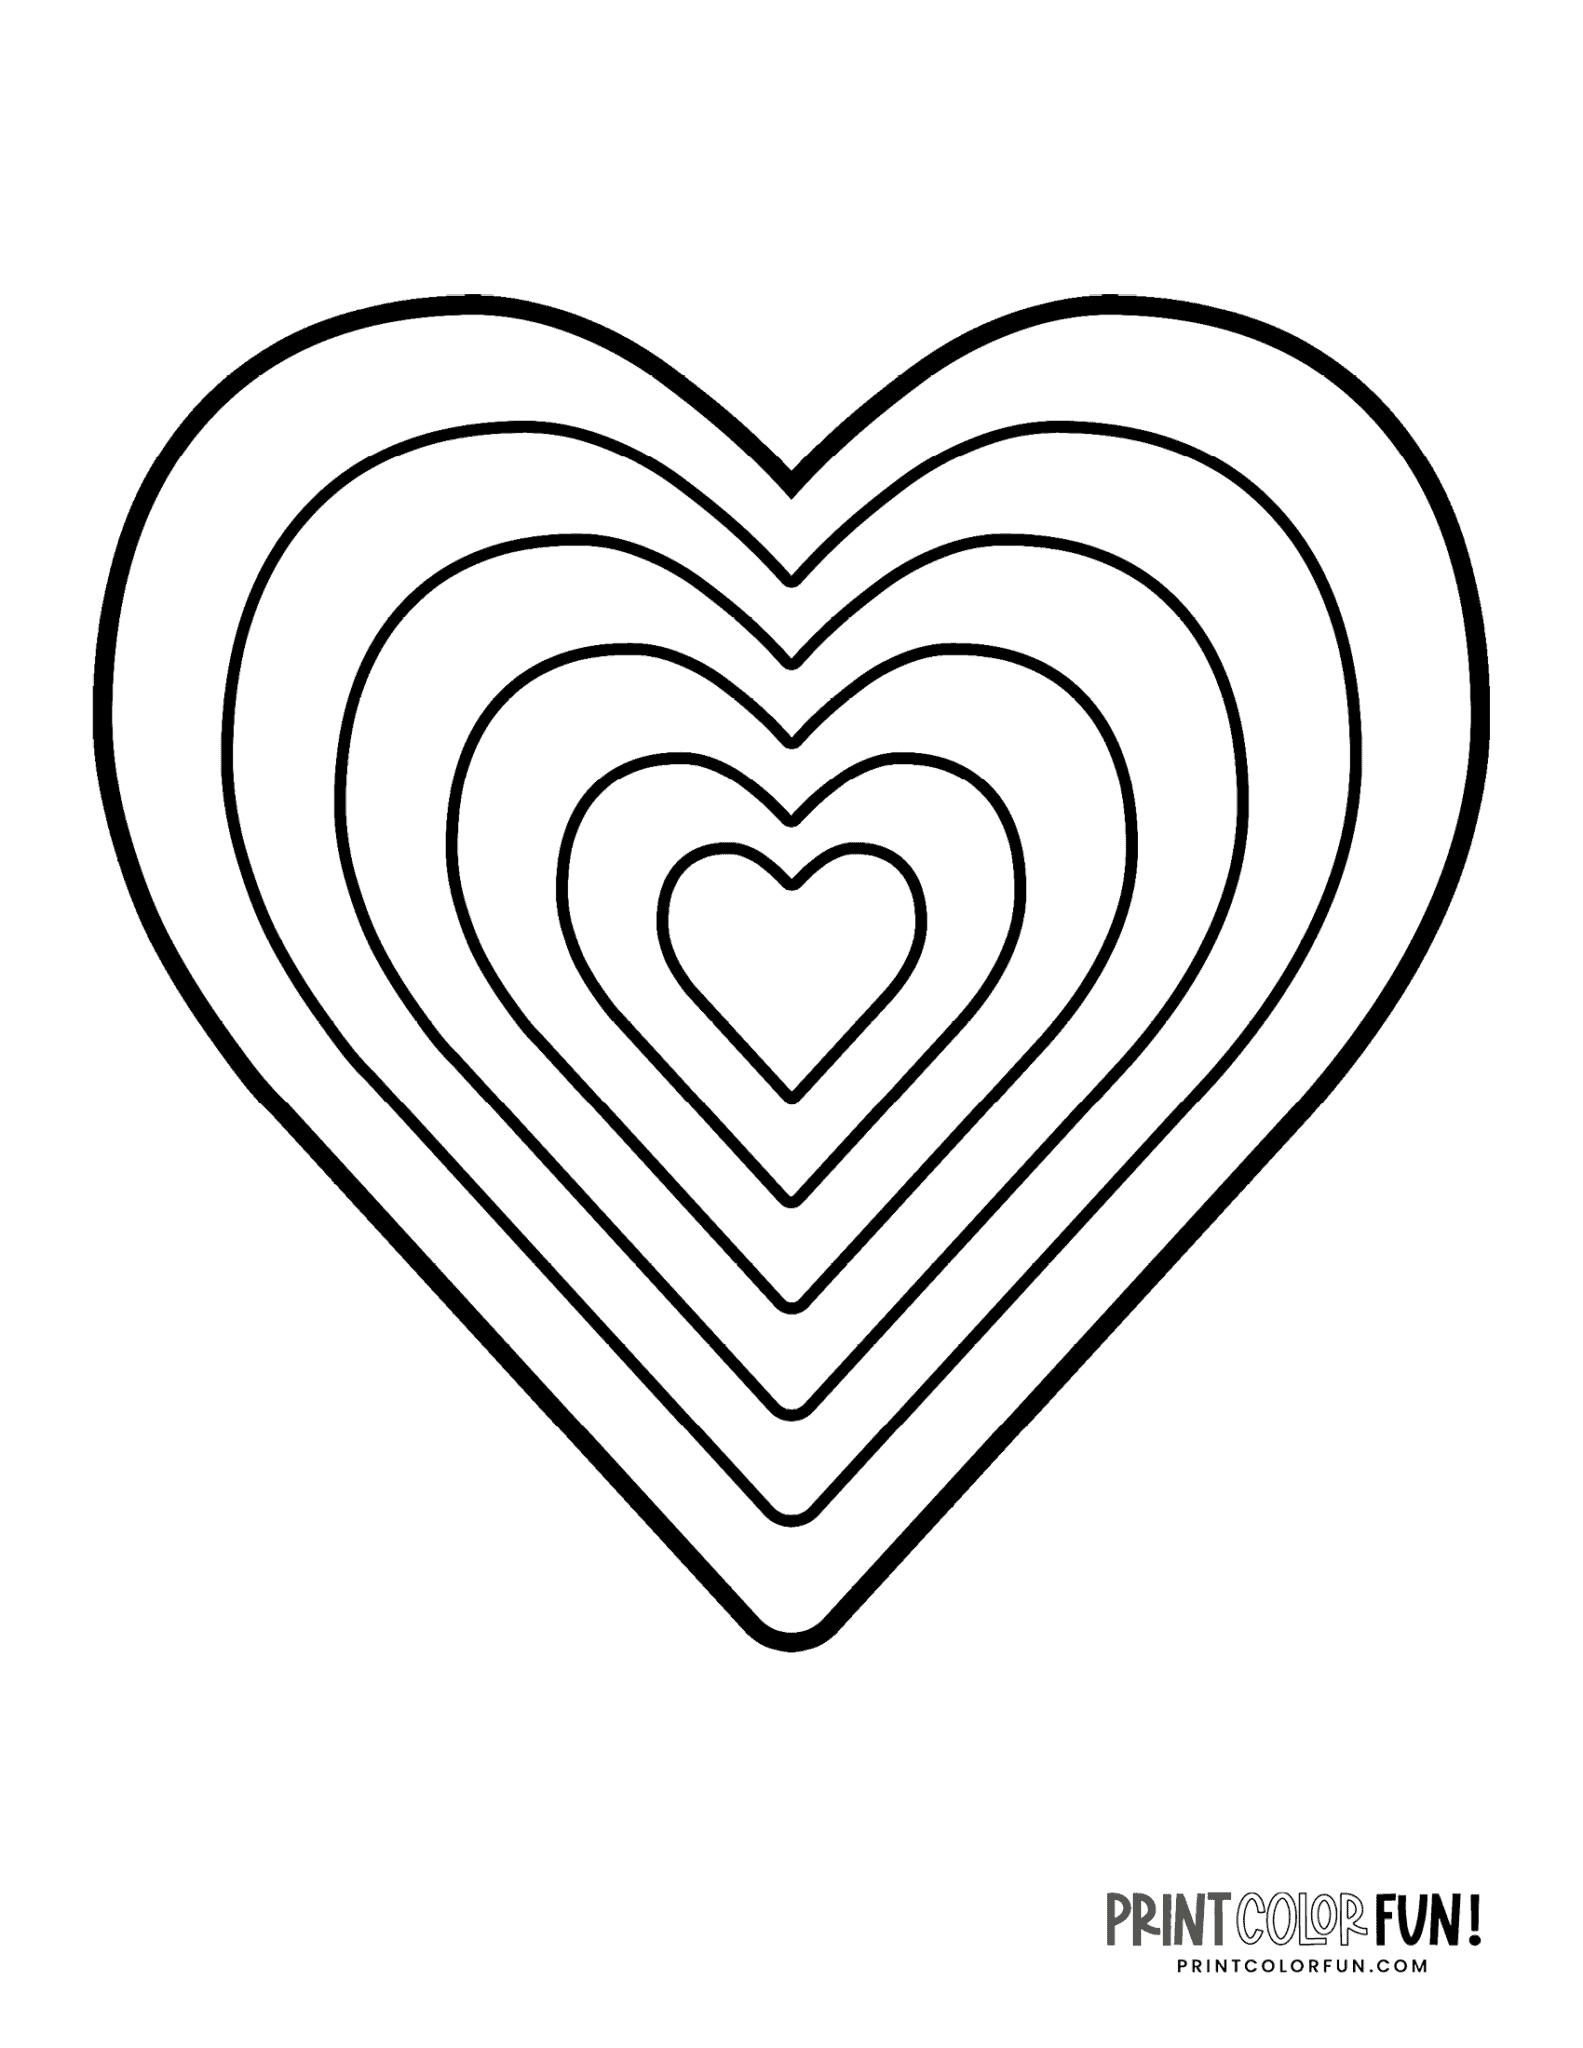 dont-eat-the-paste-heart-love-coloring-page-welcome-to-dover